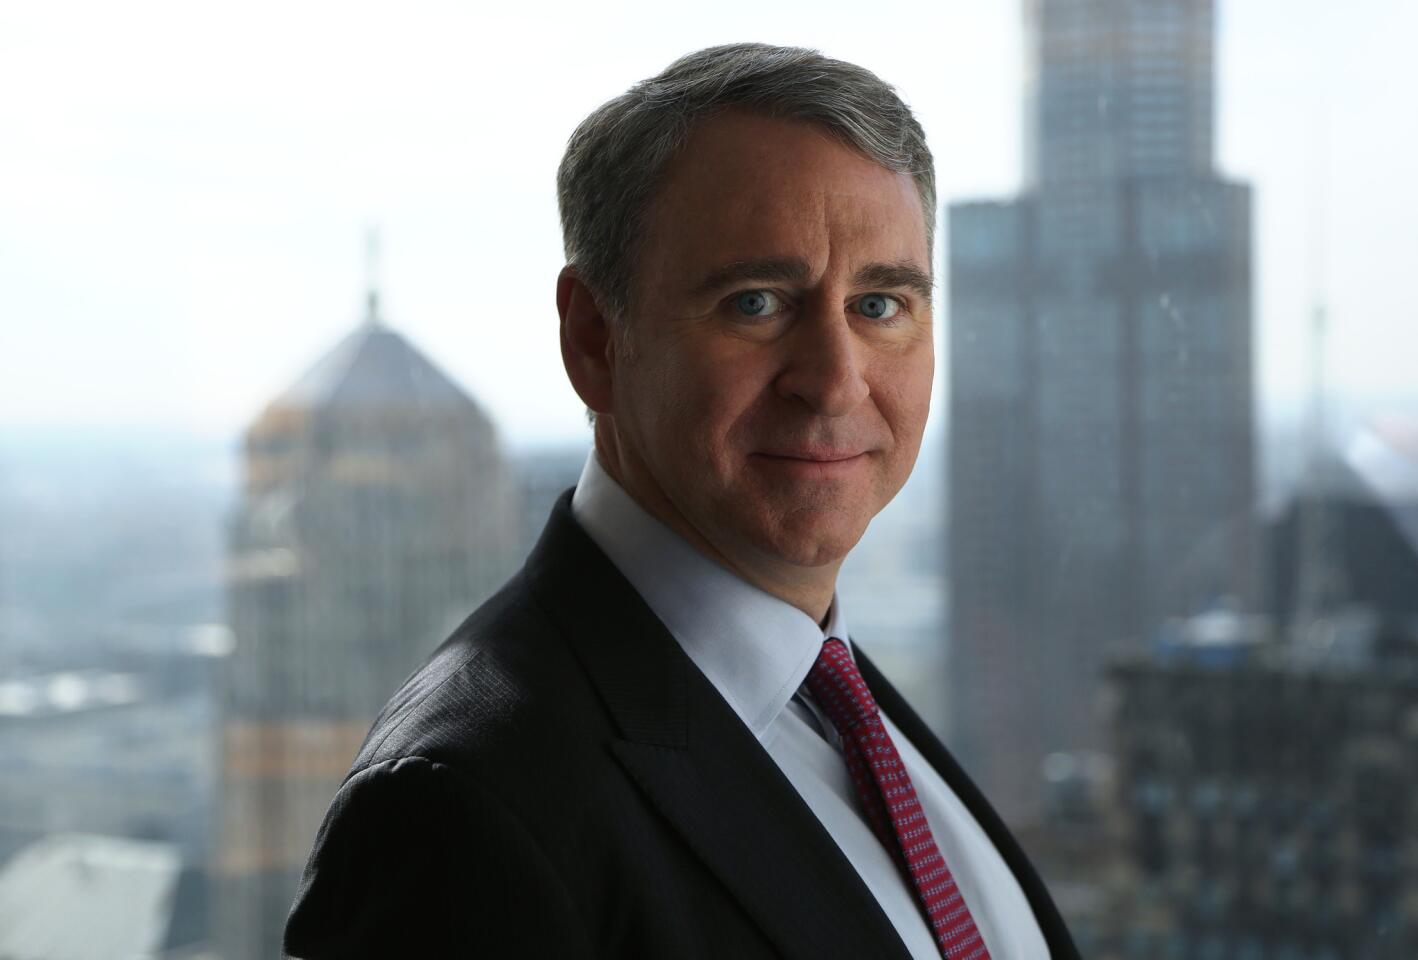 Ken Griffin, the founder and CEO of Citadel, is the 166th richest person in the world, according to Forbes' 2017 list of billionaires. He is once again the richest persion in Illinois, with a net worth of $8 billion.